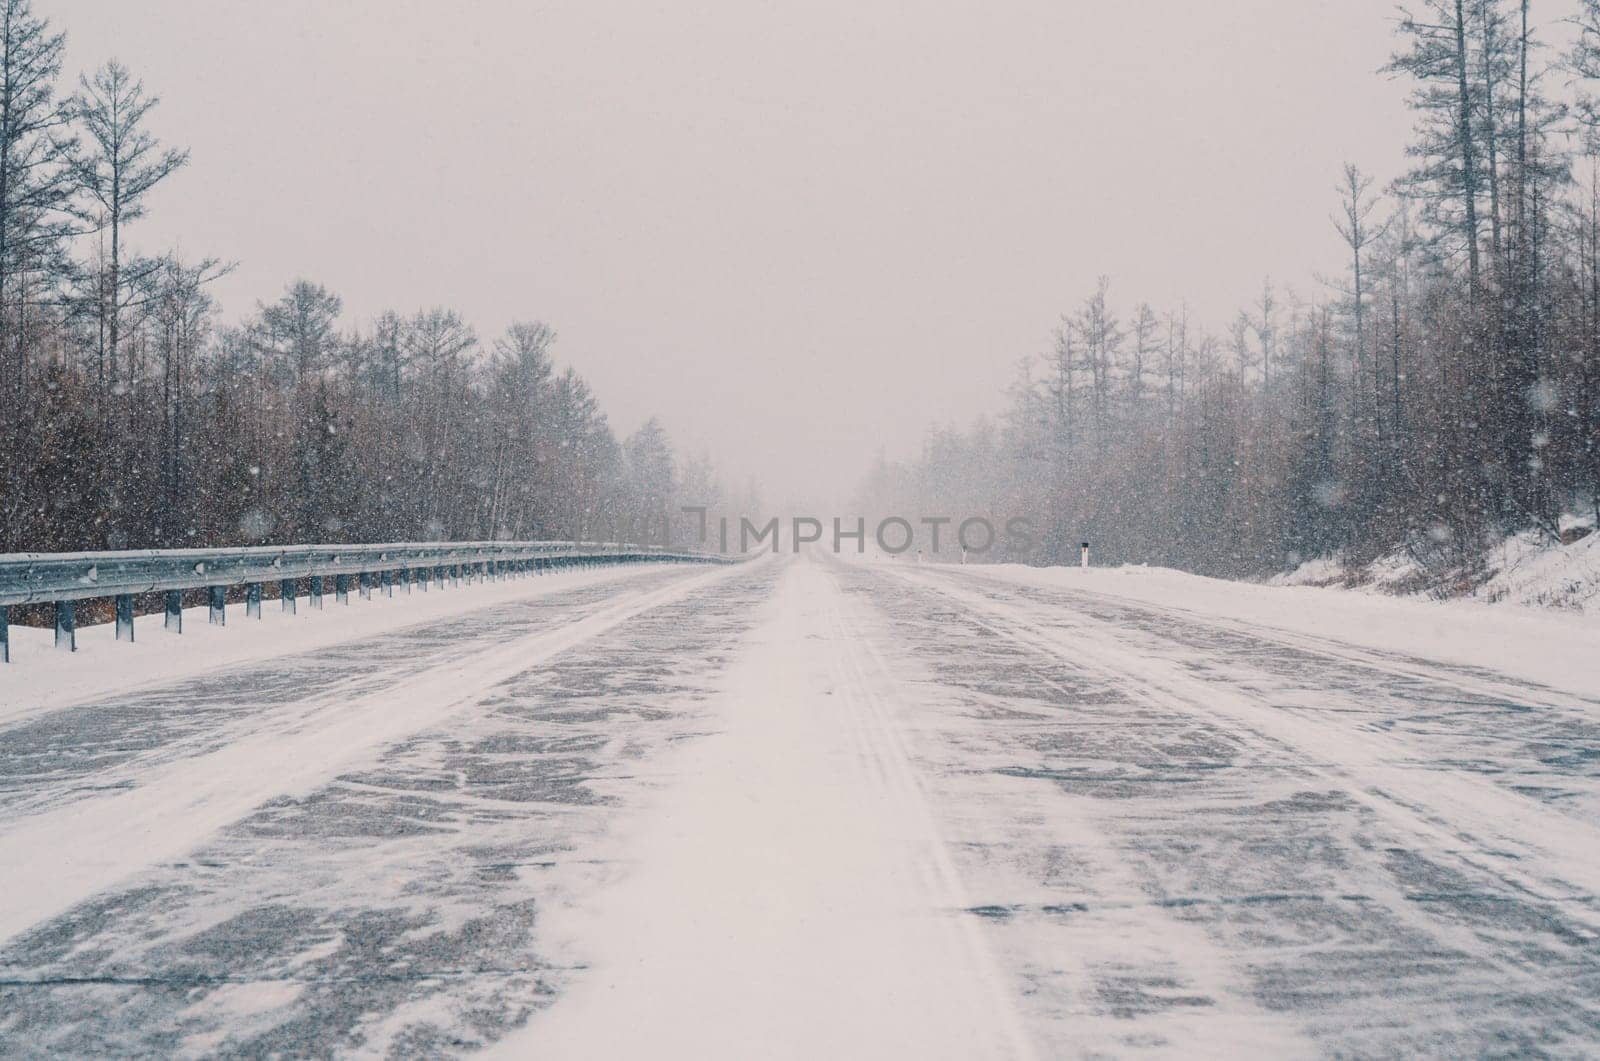 A remote highway runs through a dense forest, heavily covered in snow amid a fierce winter storm. Visibility is low, and the landscape is entirely white with streaks of snow crossing the road.